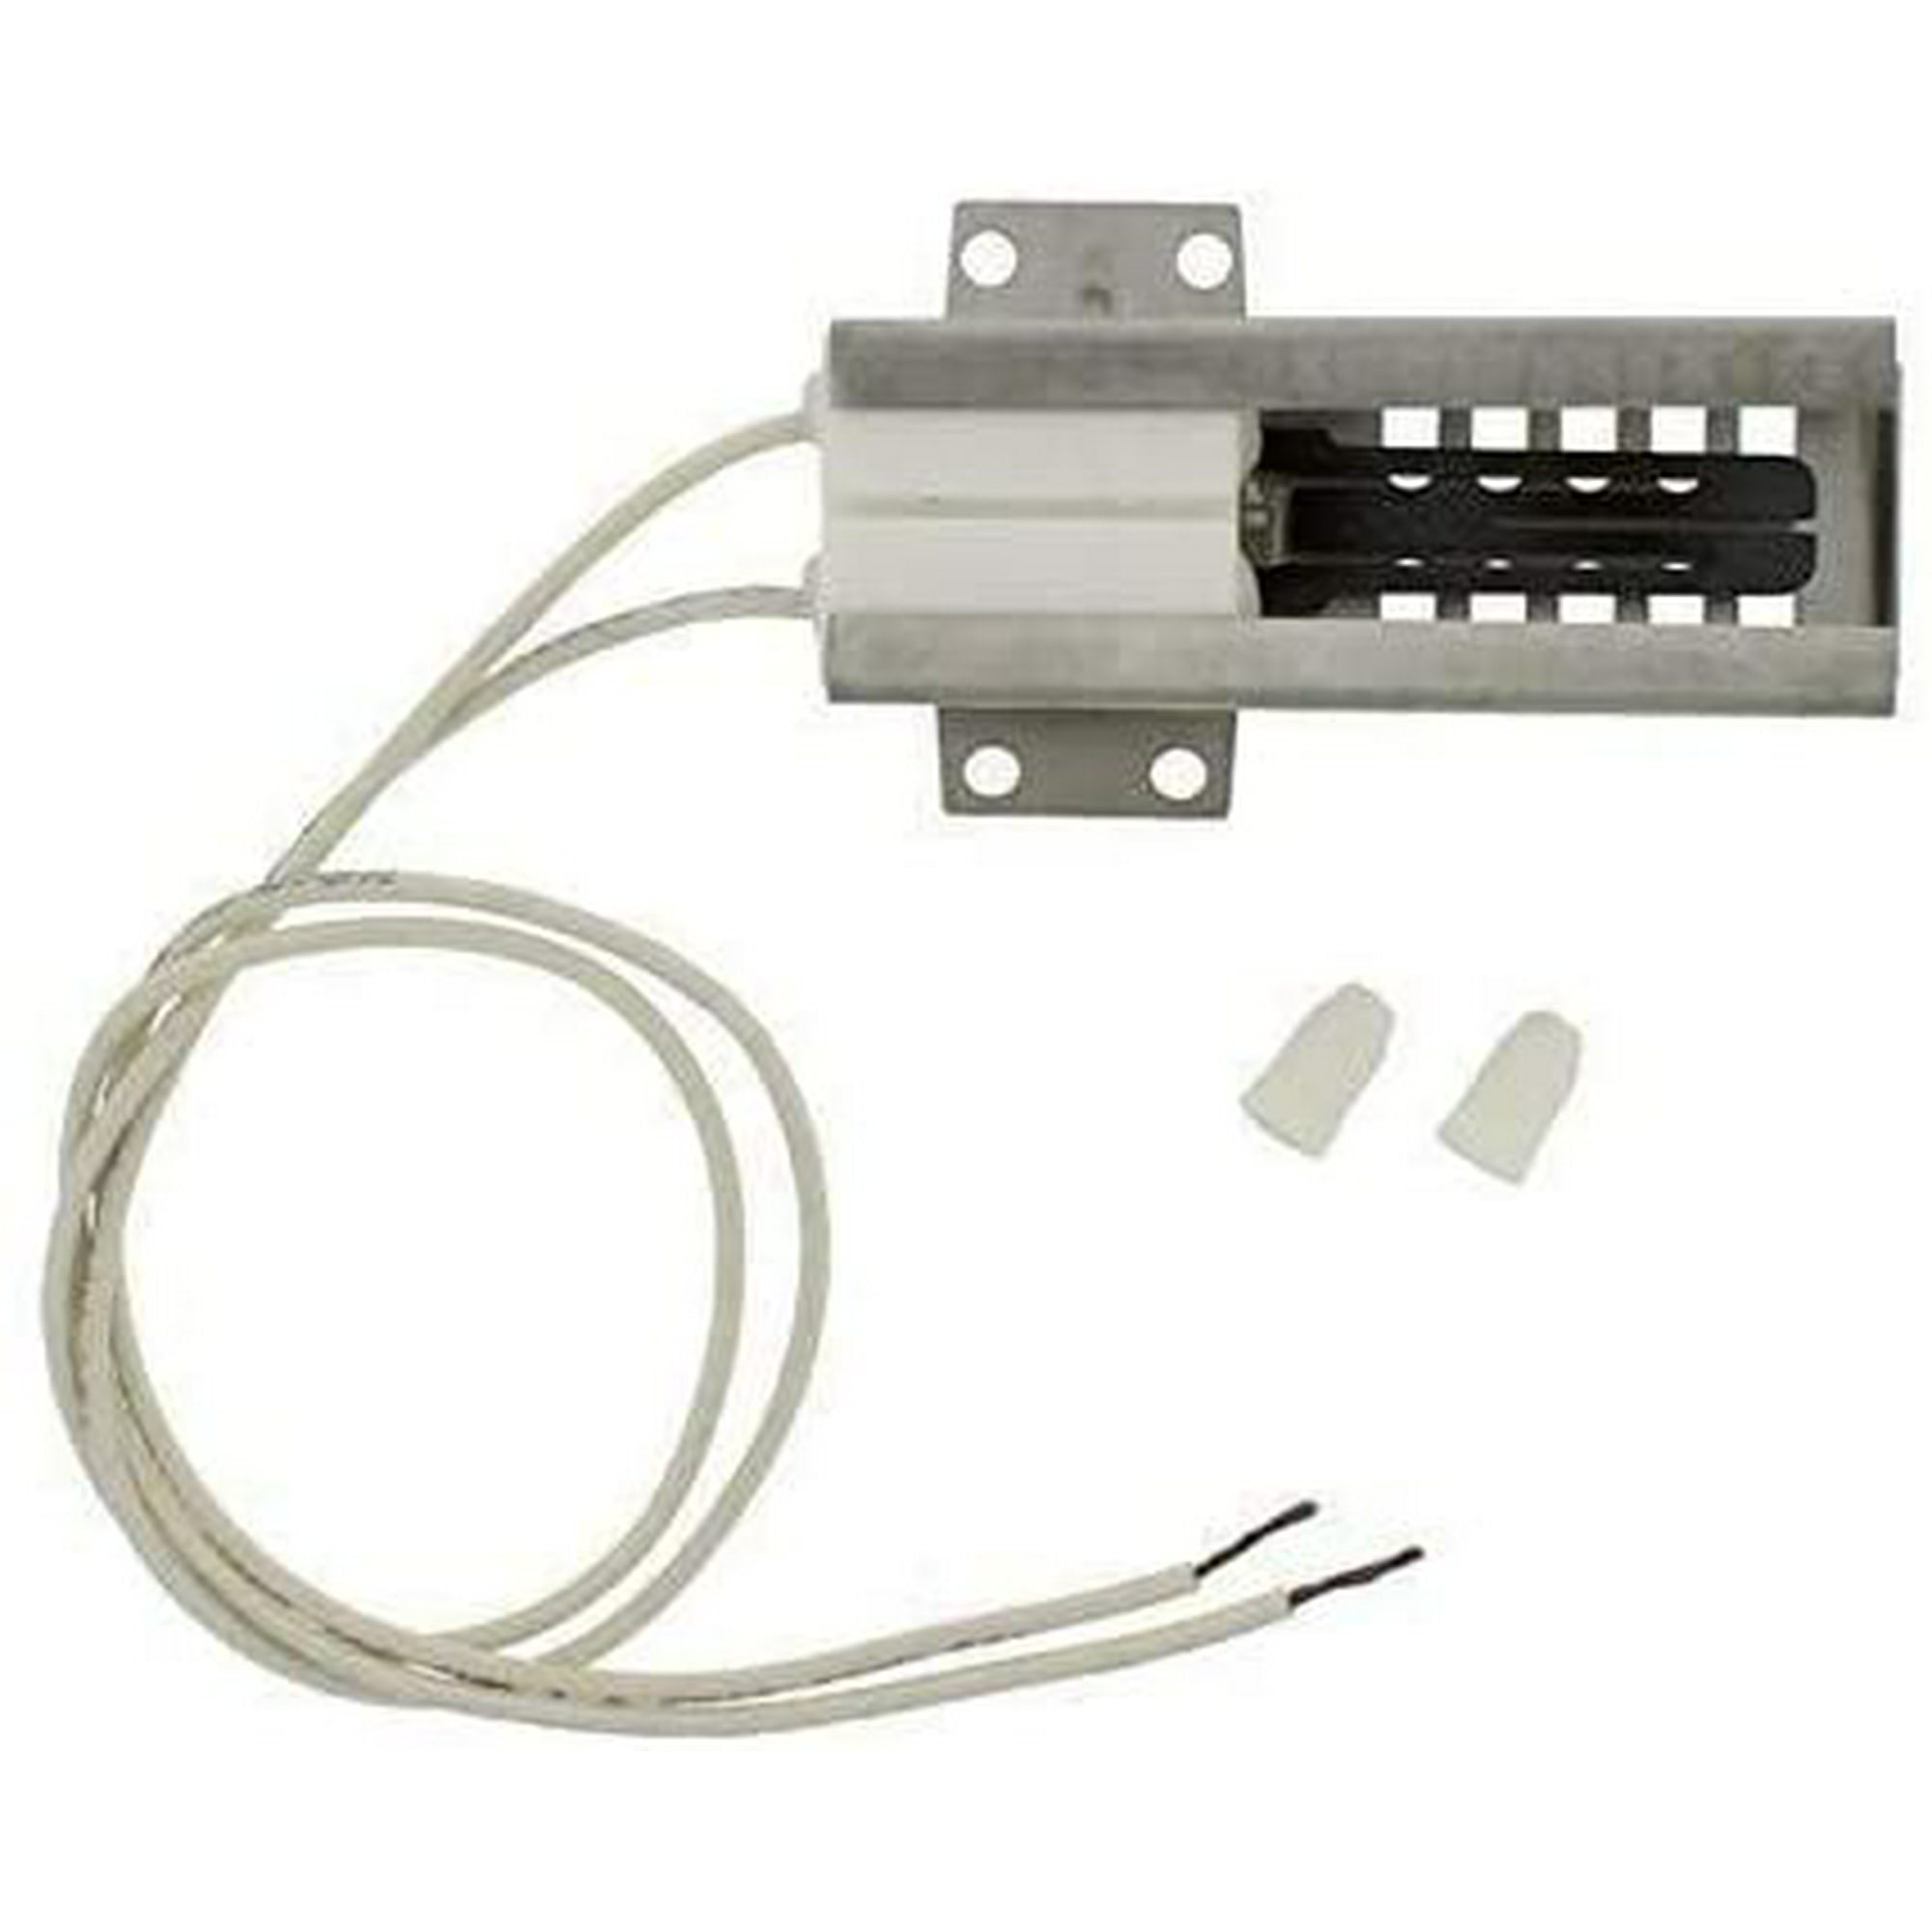 Gas Oven Range Ignitor for LG EBZ37171602 Igniter